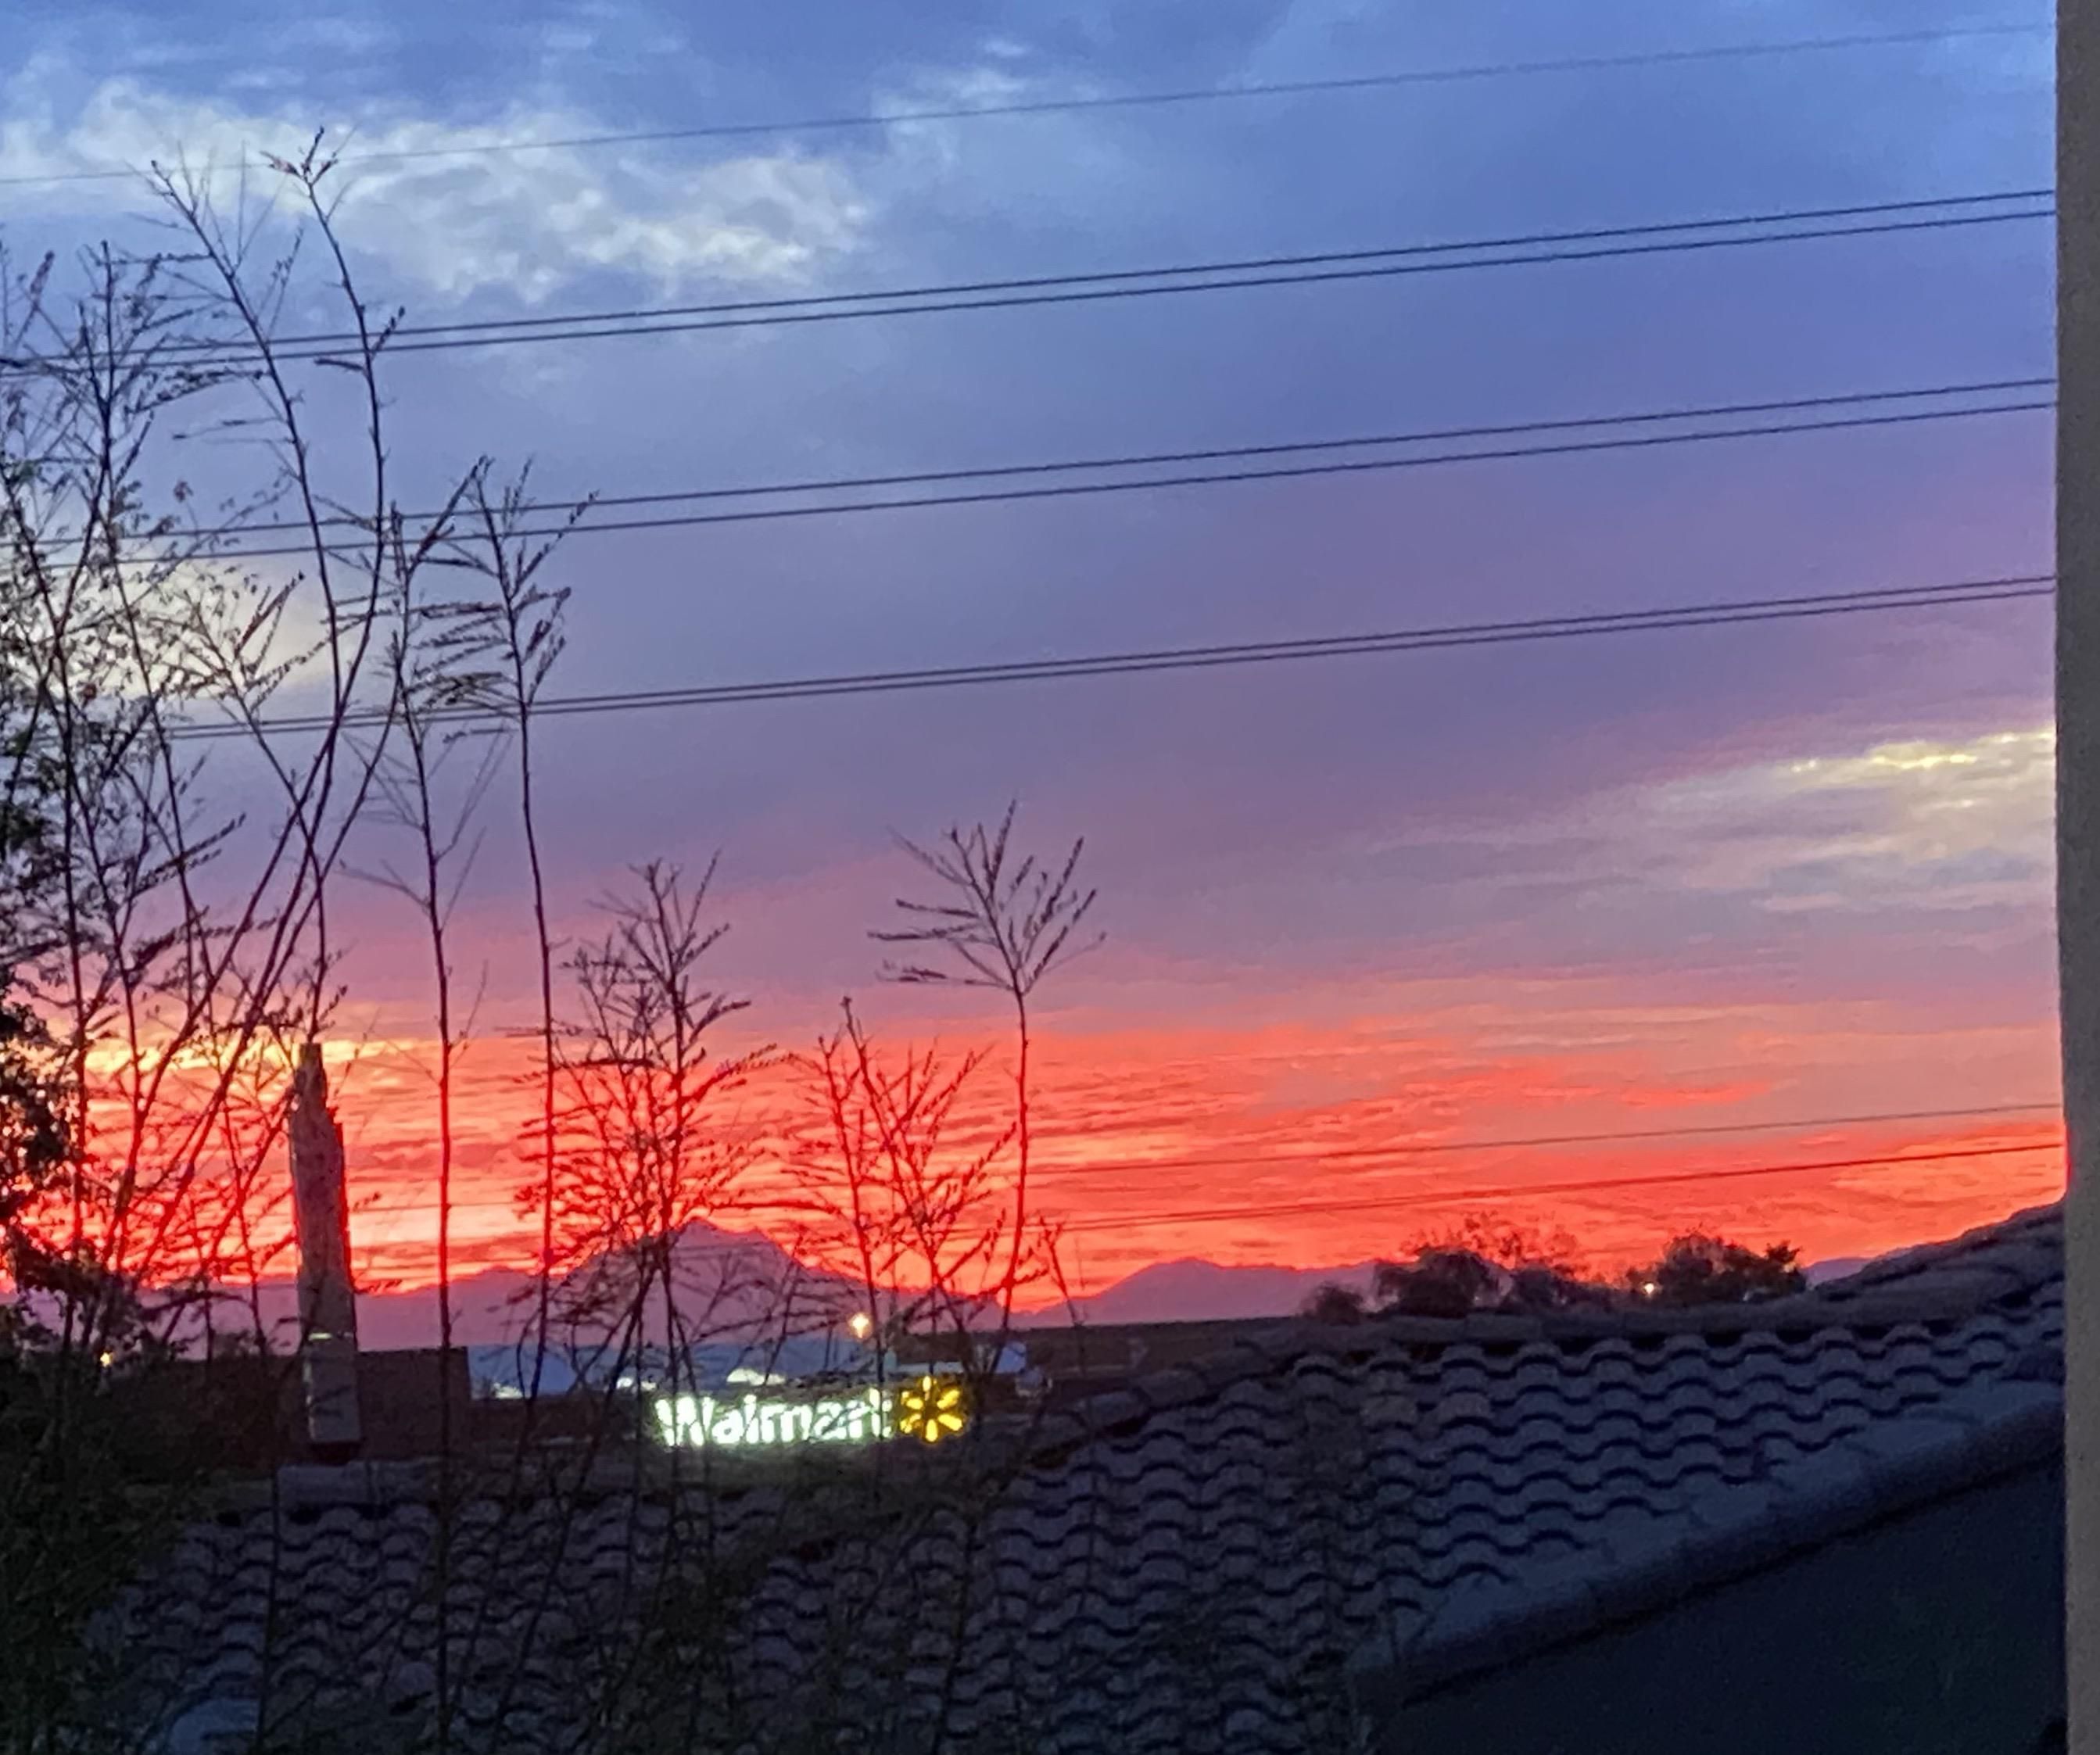 My girlfriend knew we moved into the right apartment when she saw the view of the Walmart at sunset.